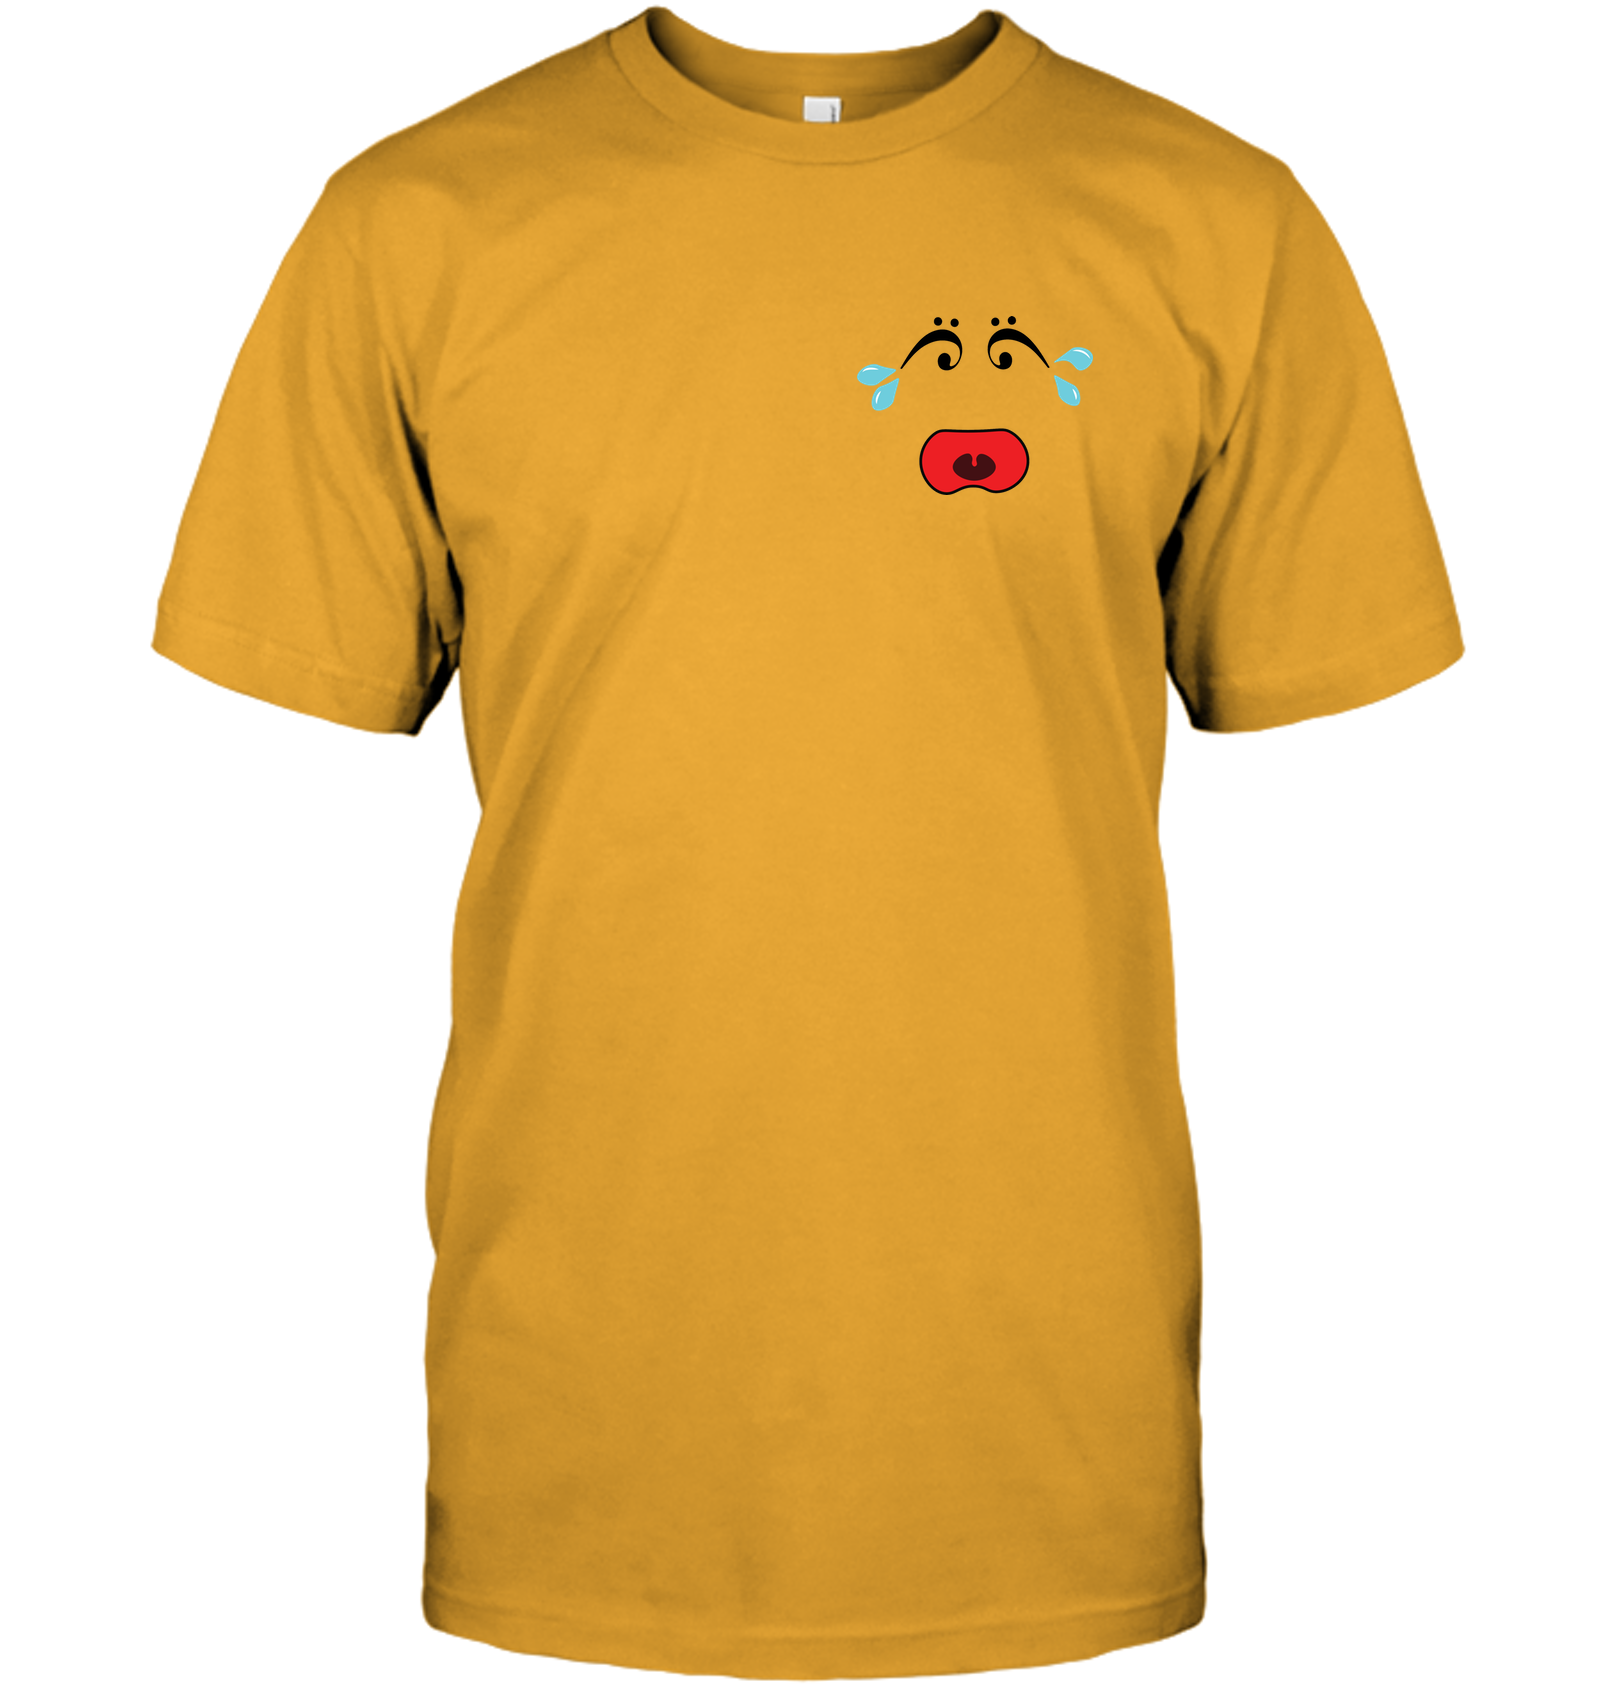 I Miss Music Teary Face (Pocket Size) - Hanes Adult Tagless® T-Shirt